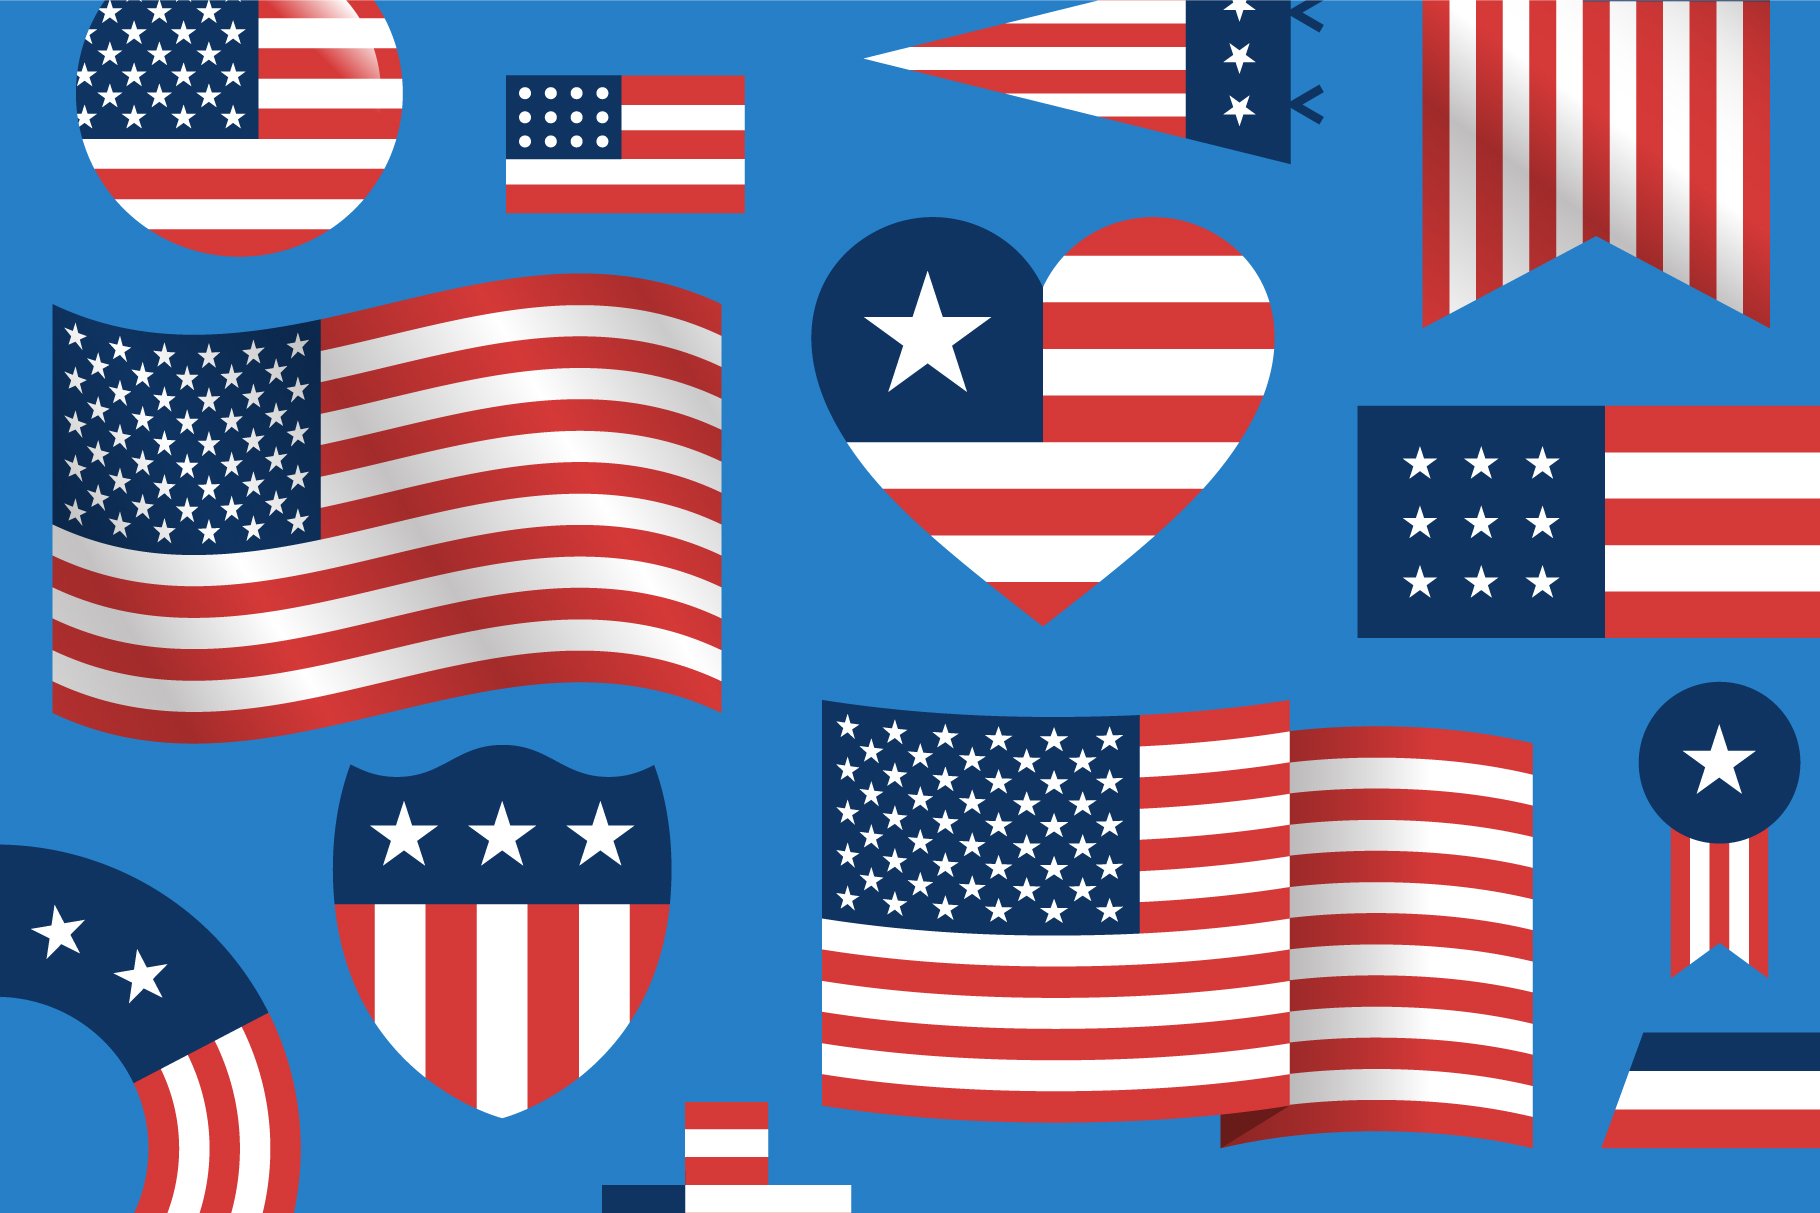 USA flags in the different shapes.